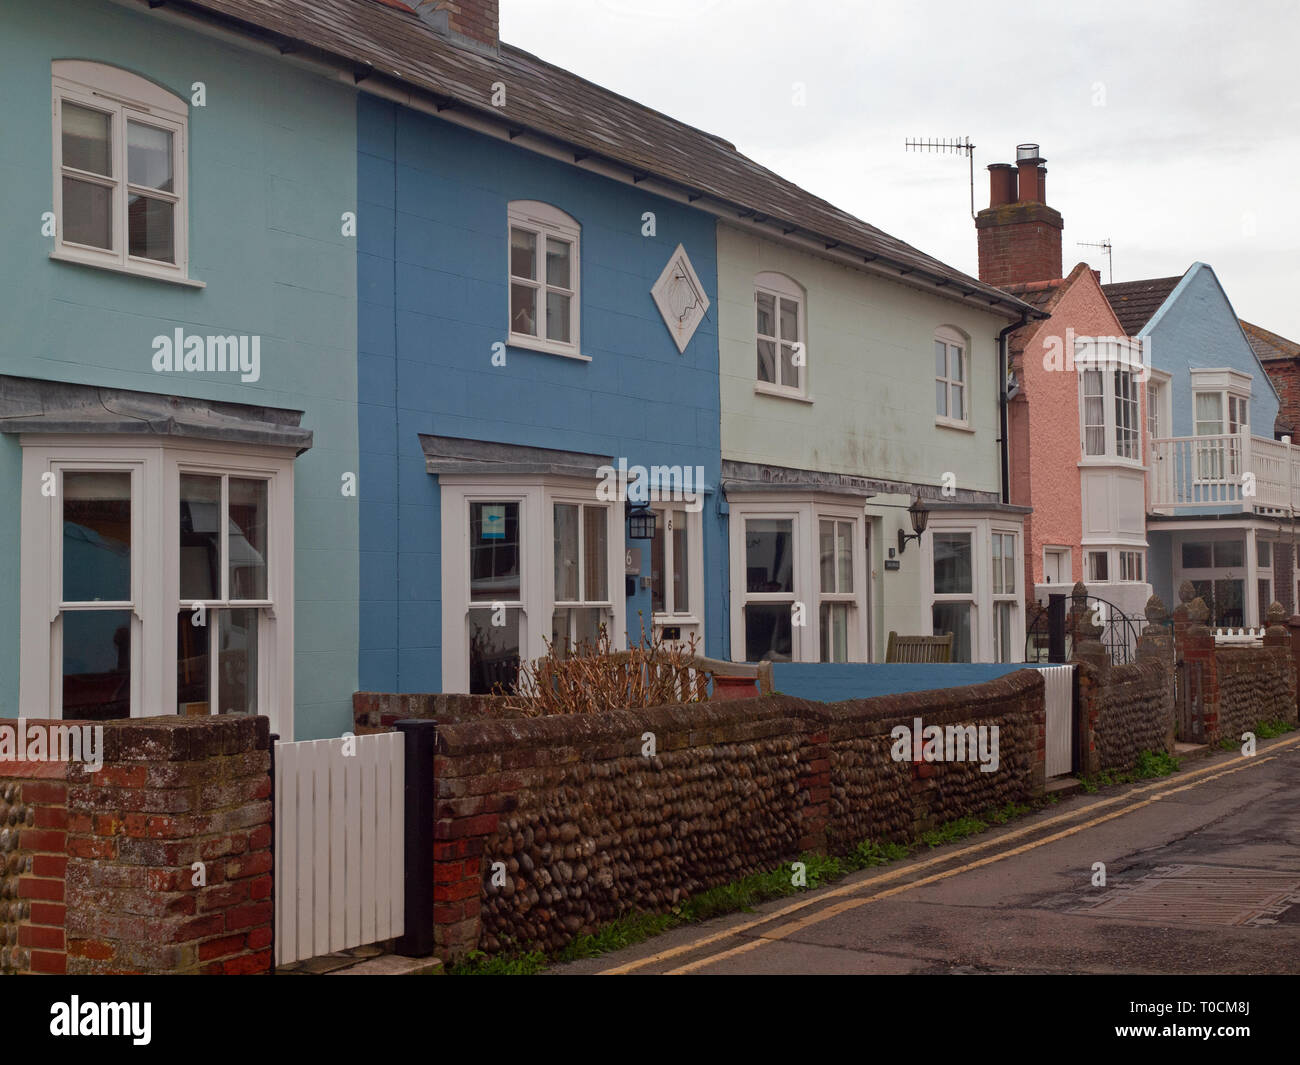 The Pretty Brightly Coloured Cottages And Houses Of Aldeburgh